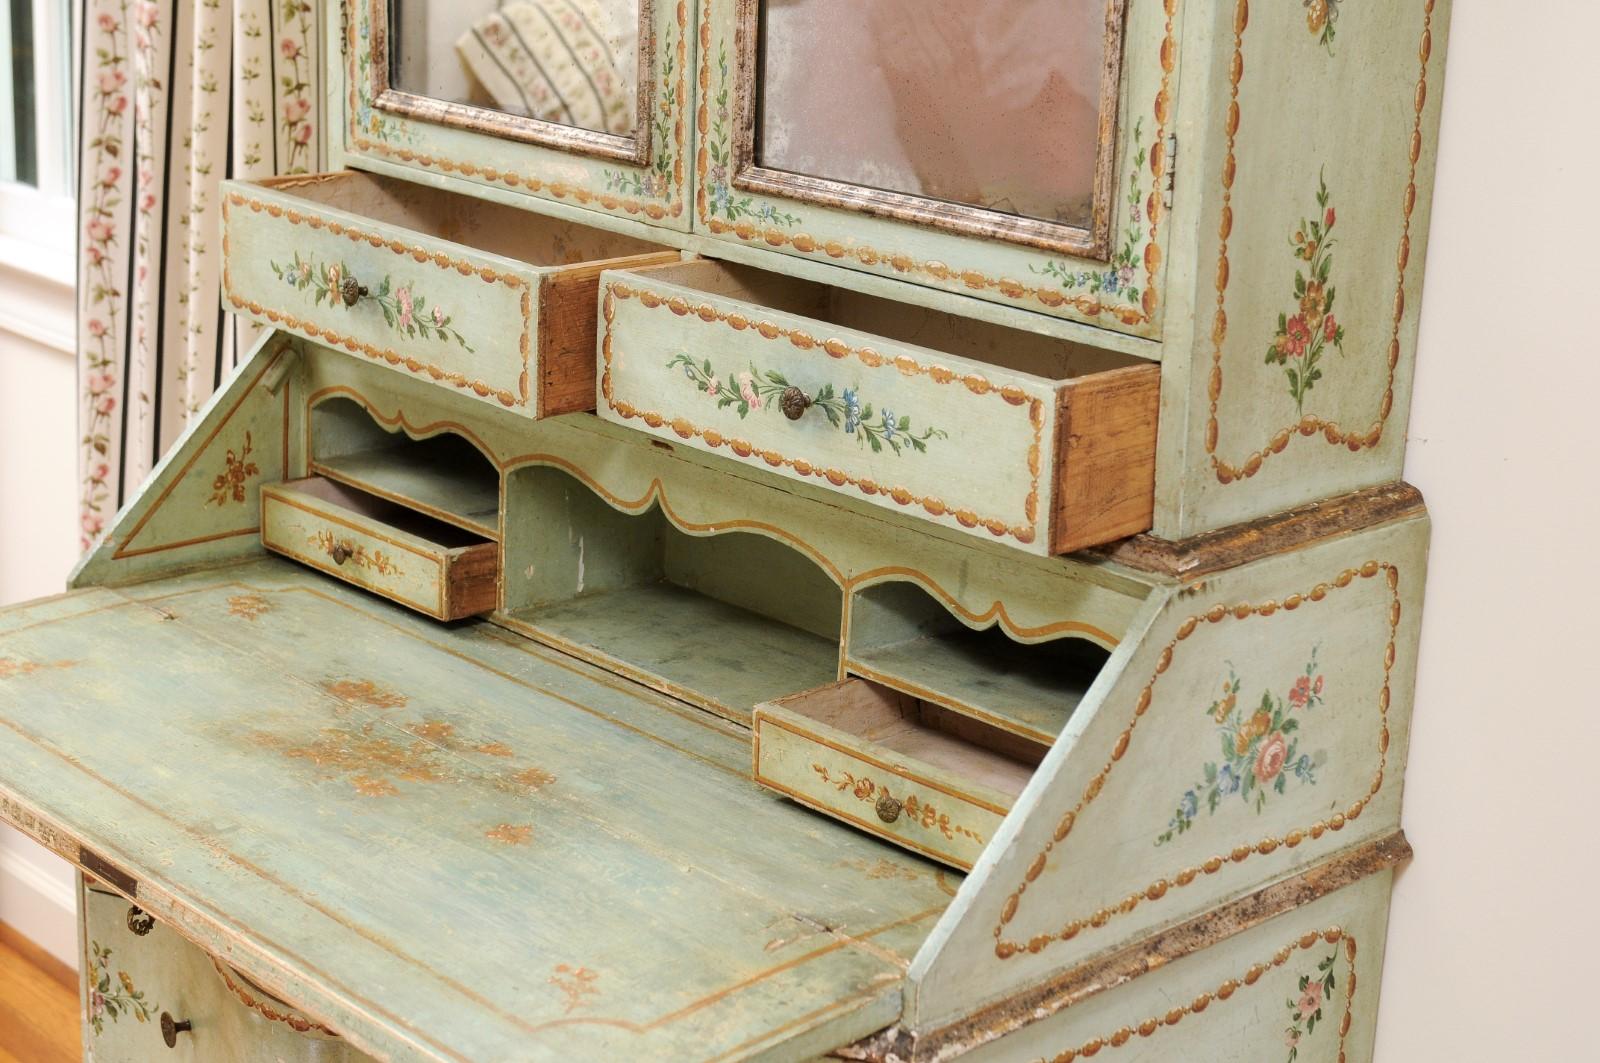 Italian 1850s Rococo Style Tall Secretary with Slanted Desk and Original Paint For Sale 4